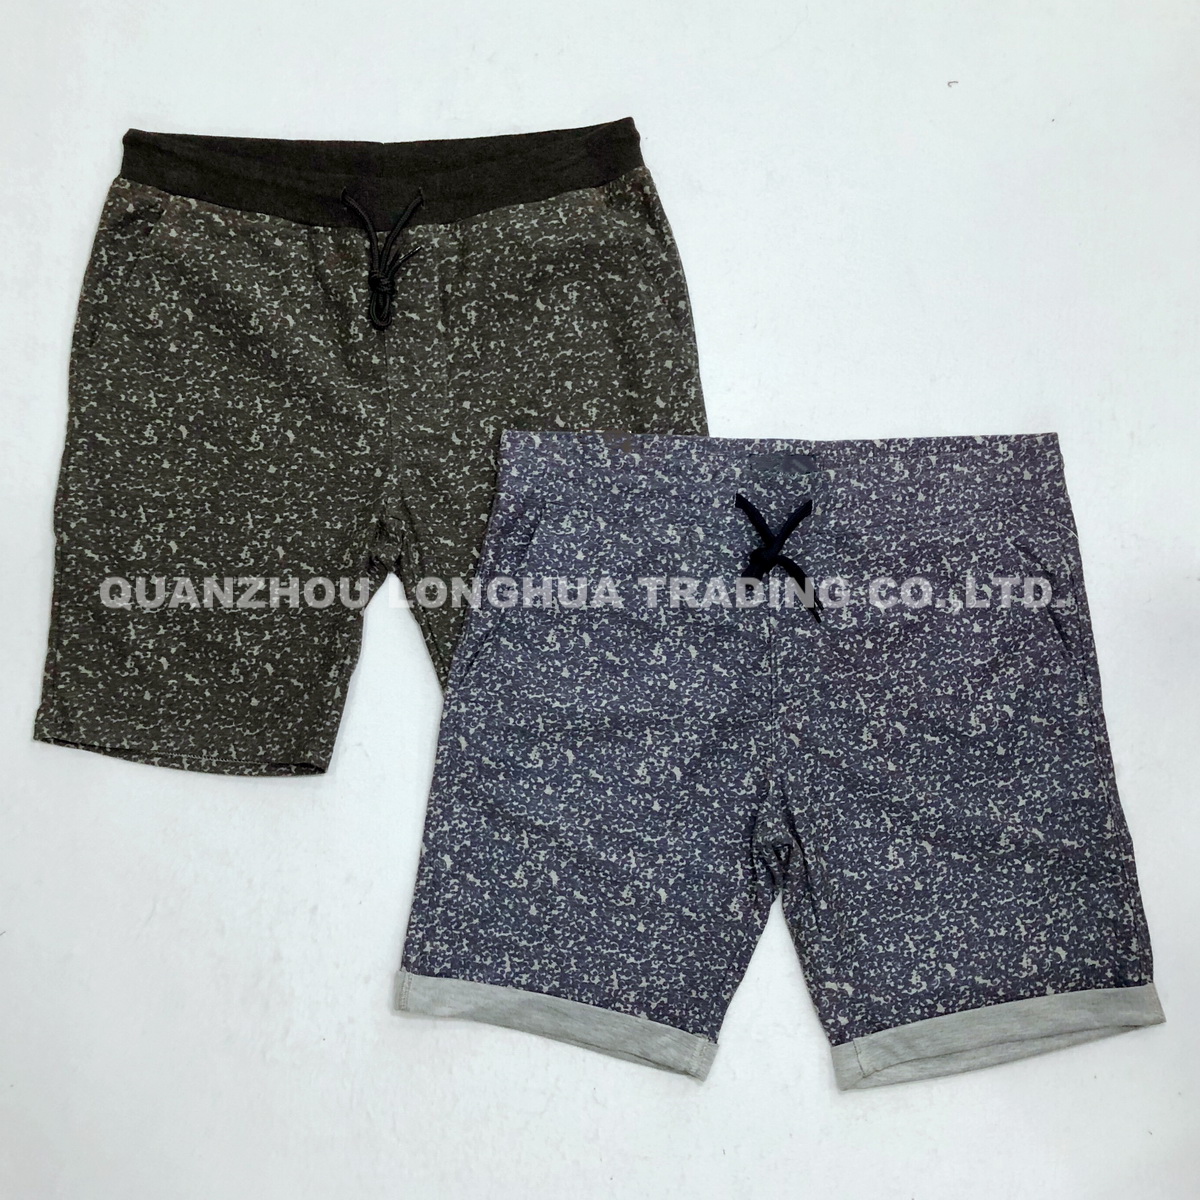 Men and Boys Shorts With Printing Apparel Jeans Casual Trousers Kids Wear Pants Knitwear T/C Terry Navy and Black